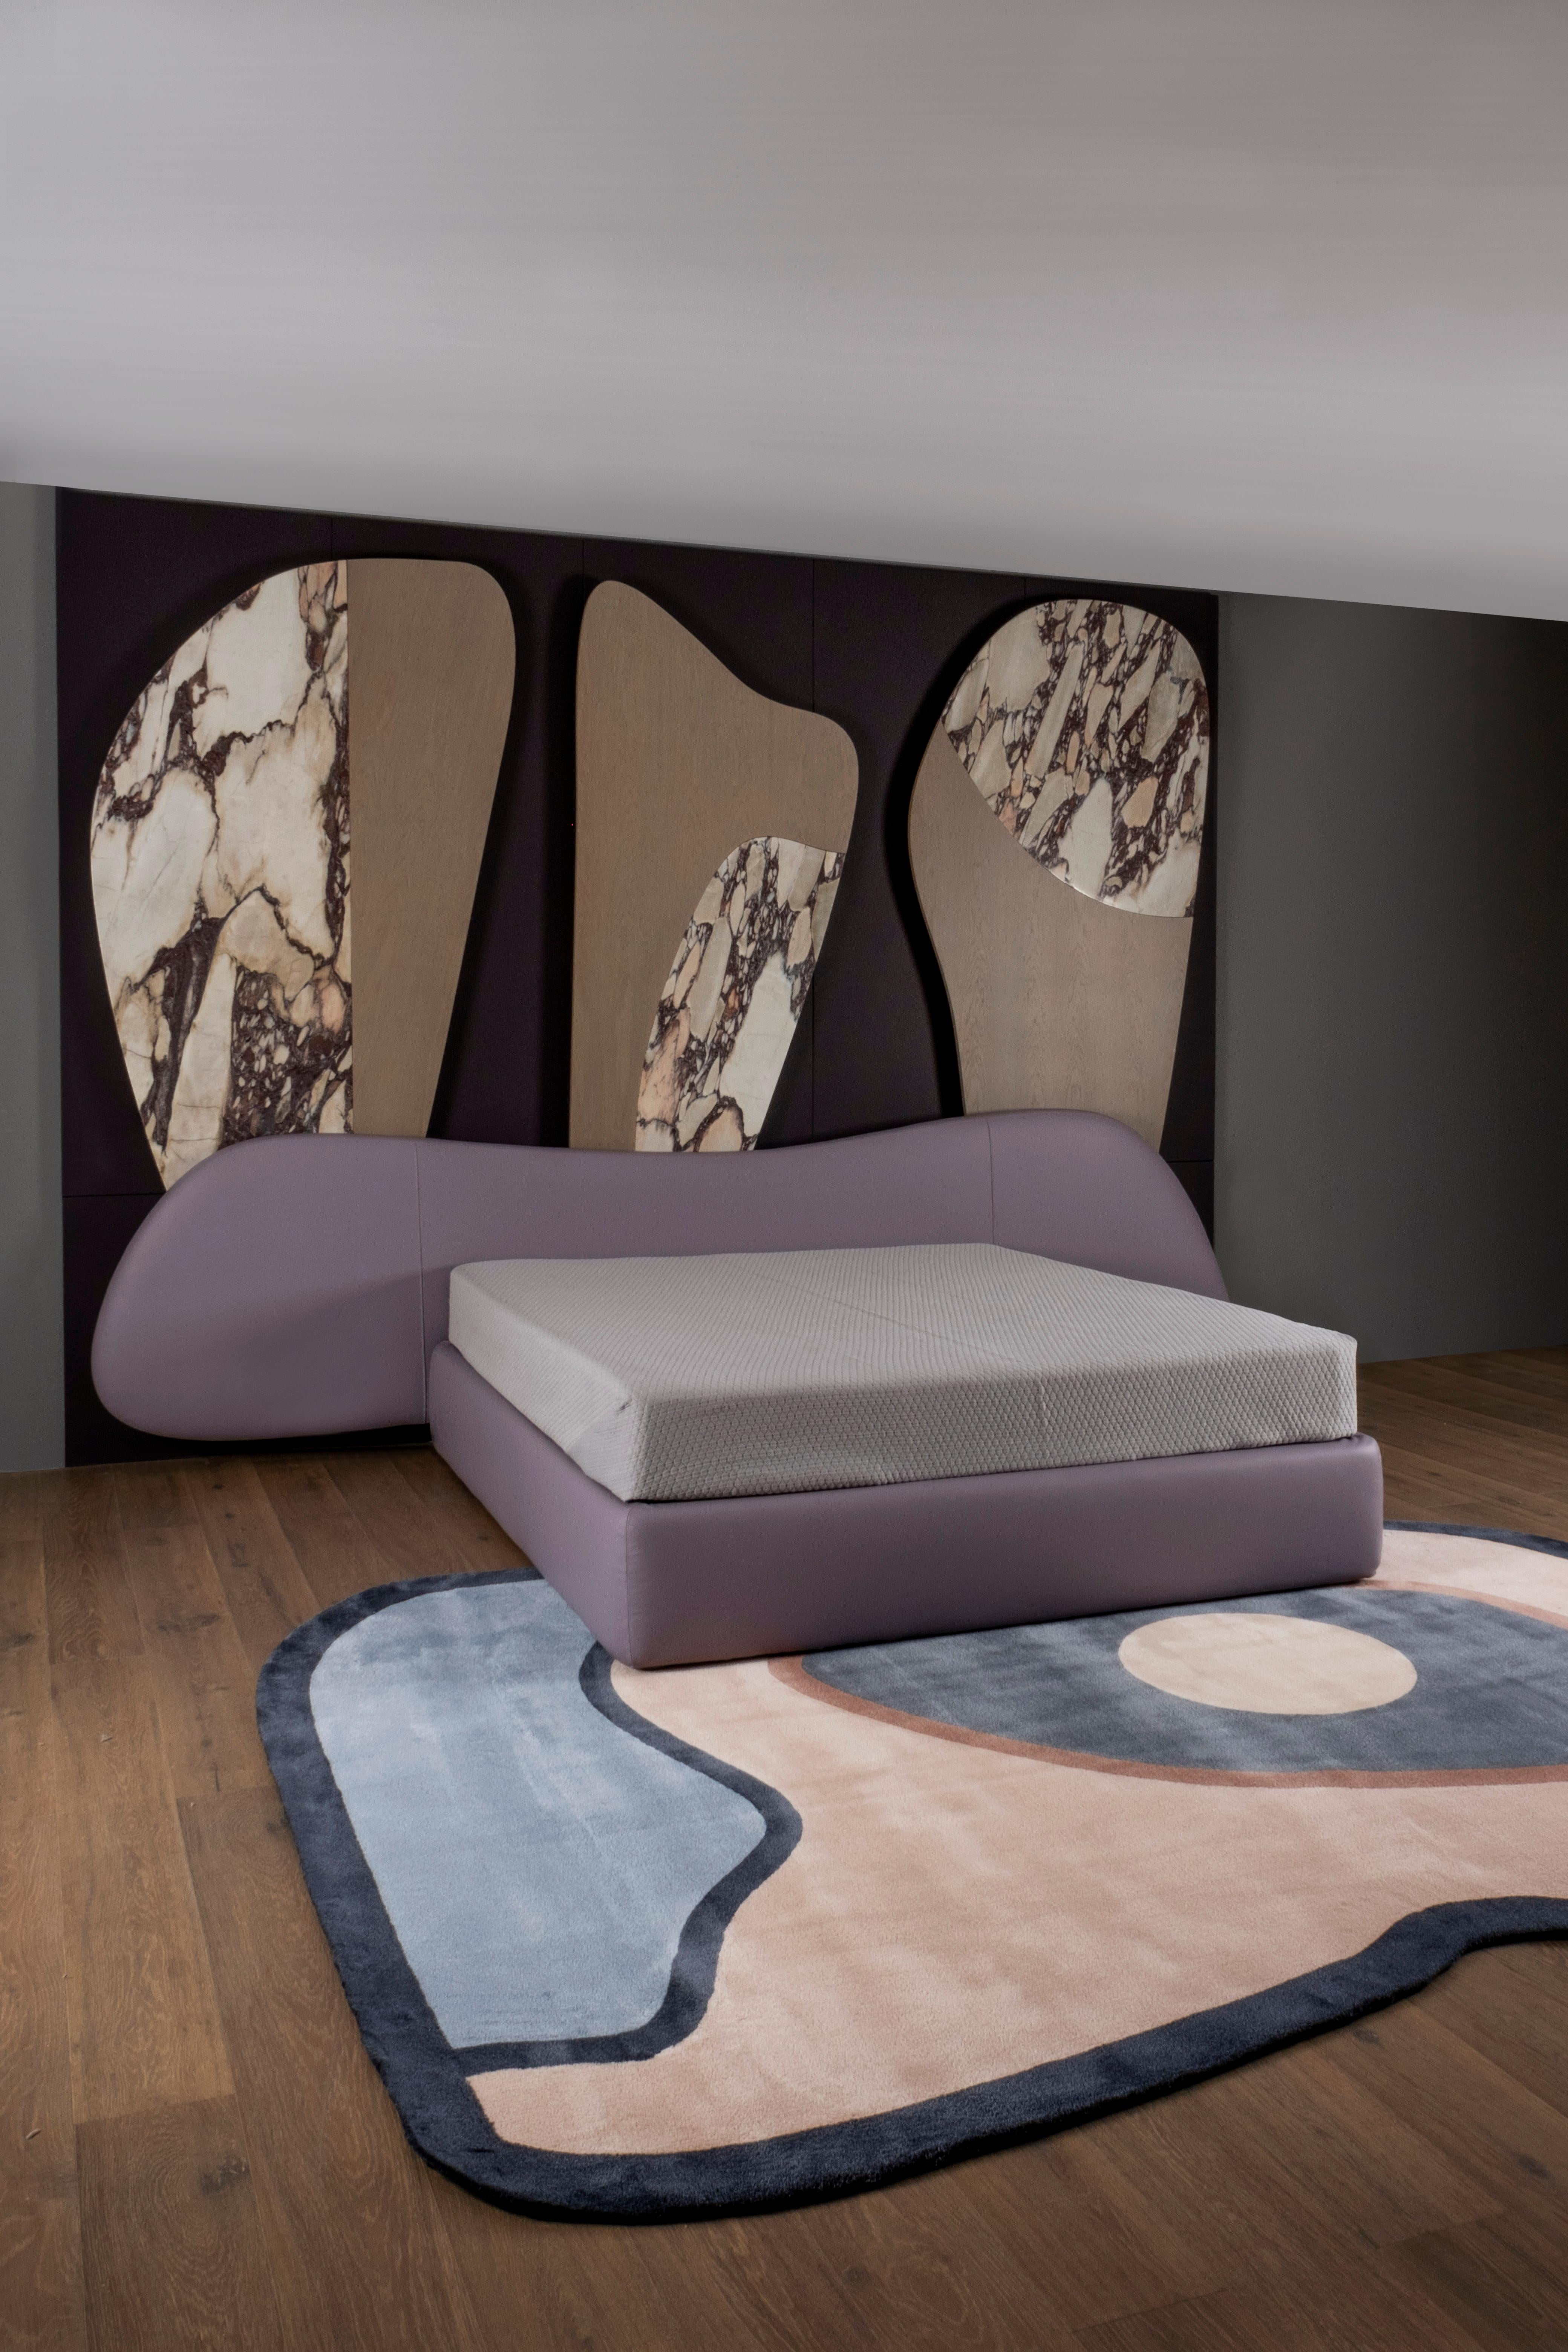 Free Hand US King Size Bed, Modern Collection, Handcrafted in Portugal - Europe by GF Modern.

This listing is for a US King Size Bed, optional sizes available.

The elegant Free Hand bed is upholstered in purple, high-quality Italian leather and is